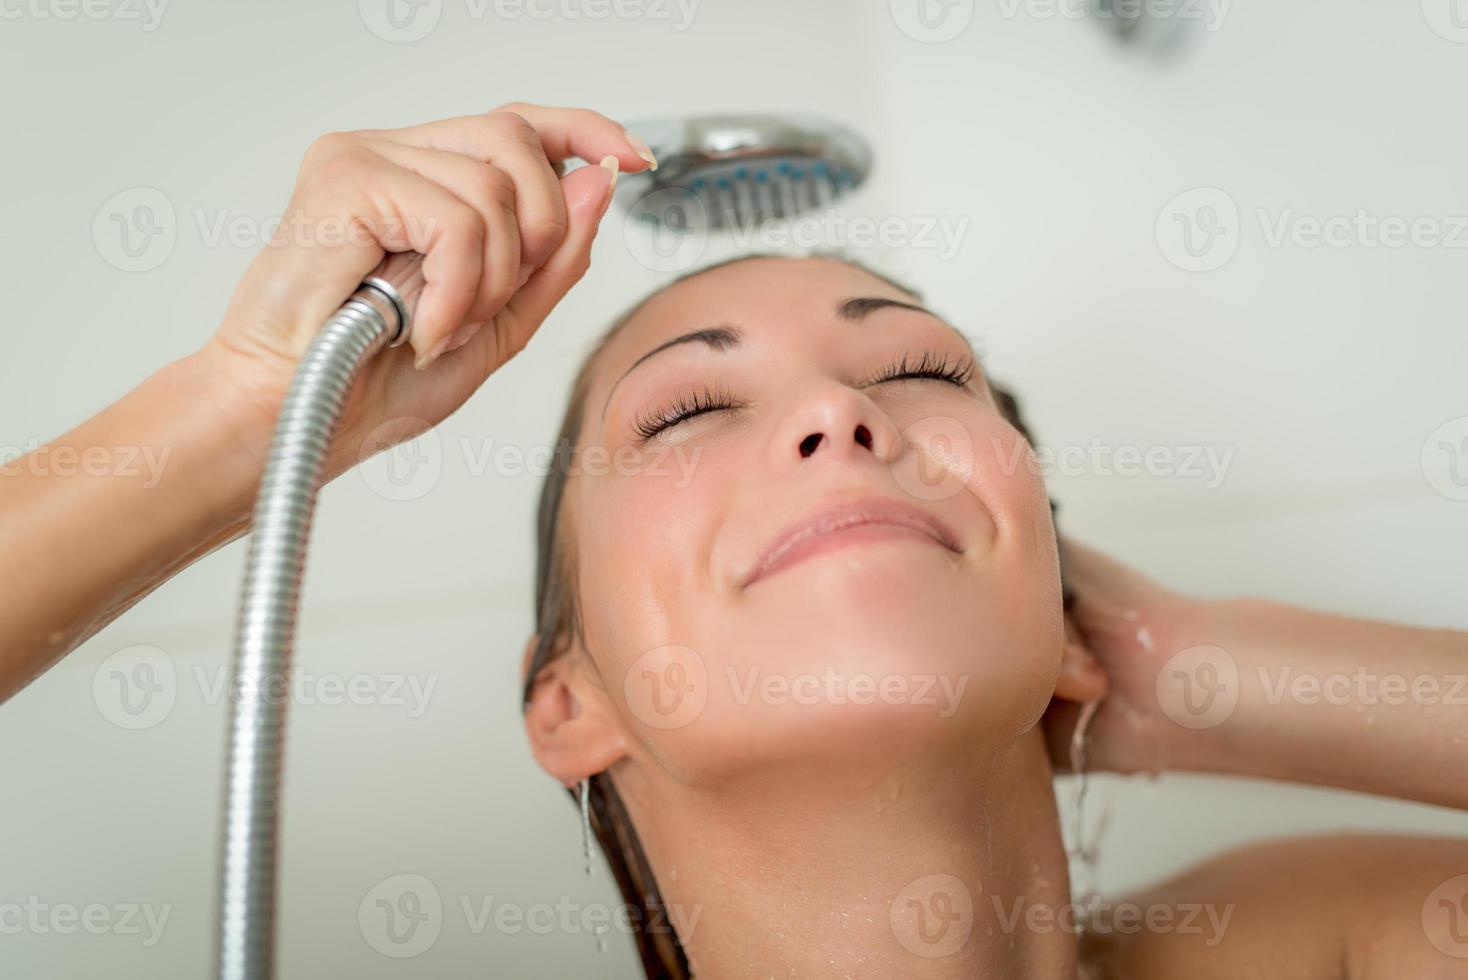 Showering woman view photo